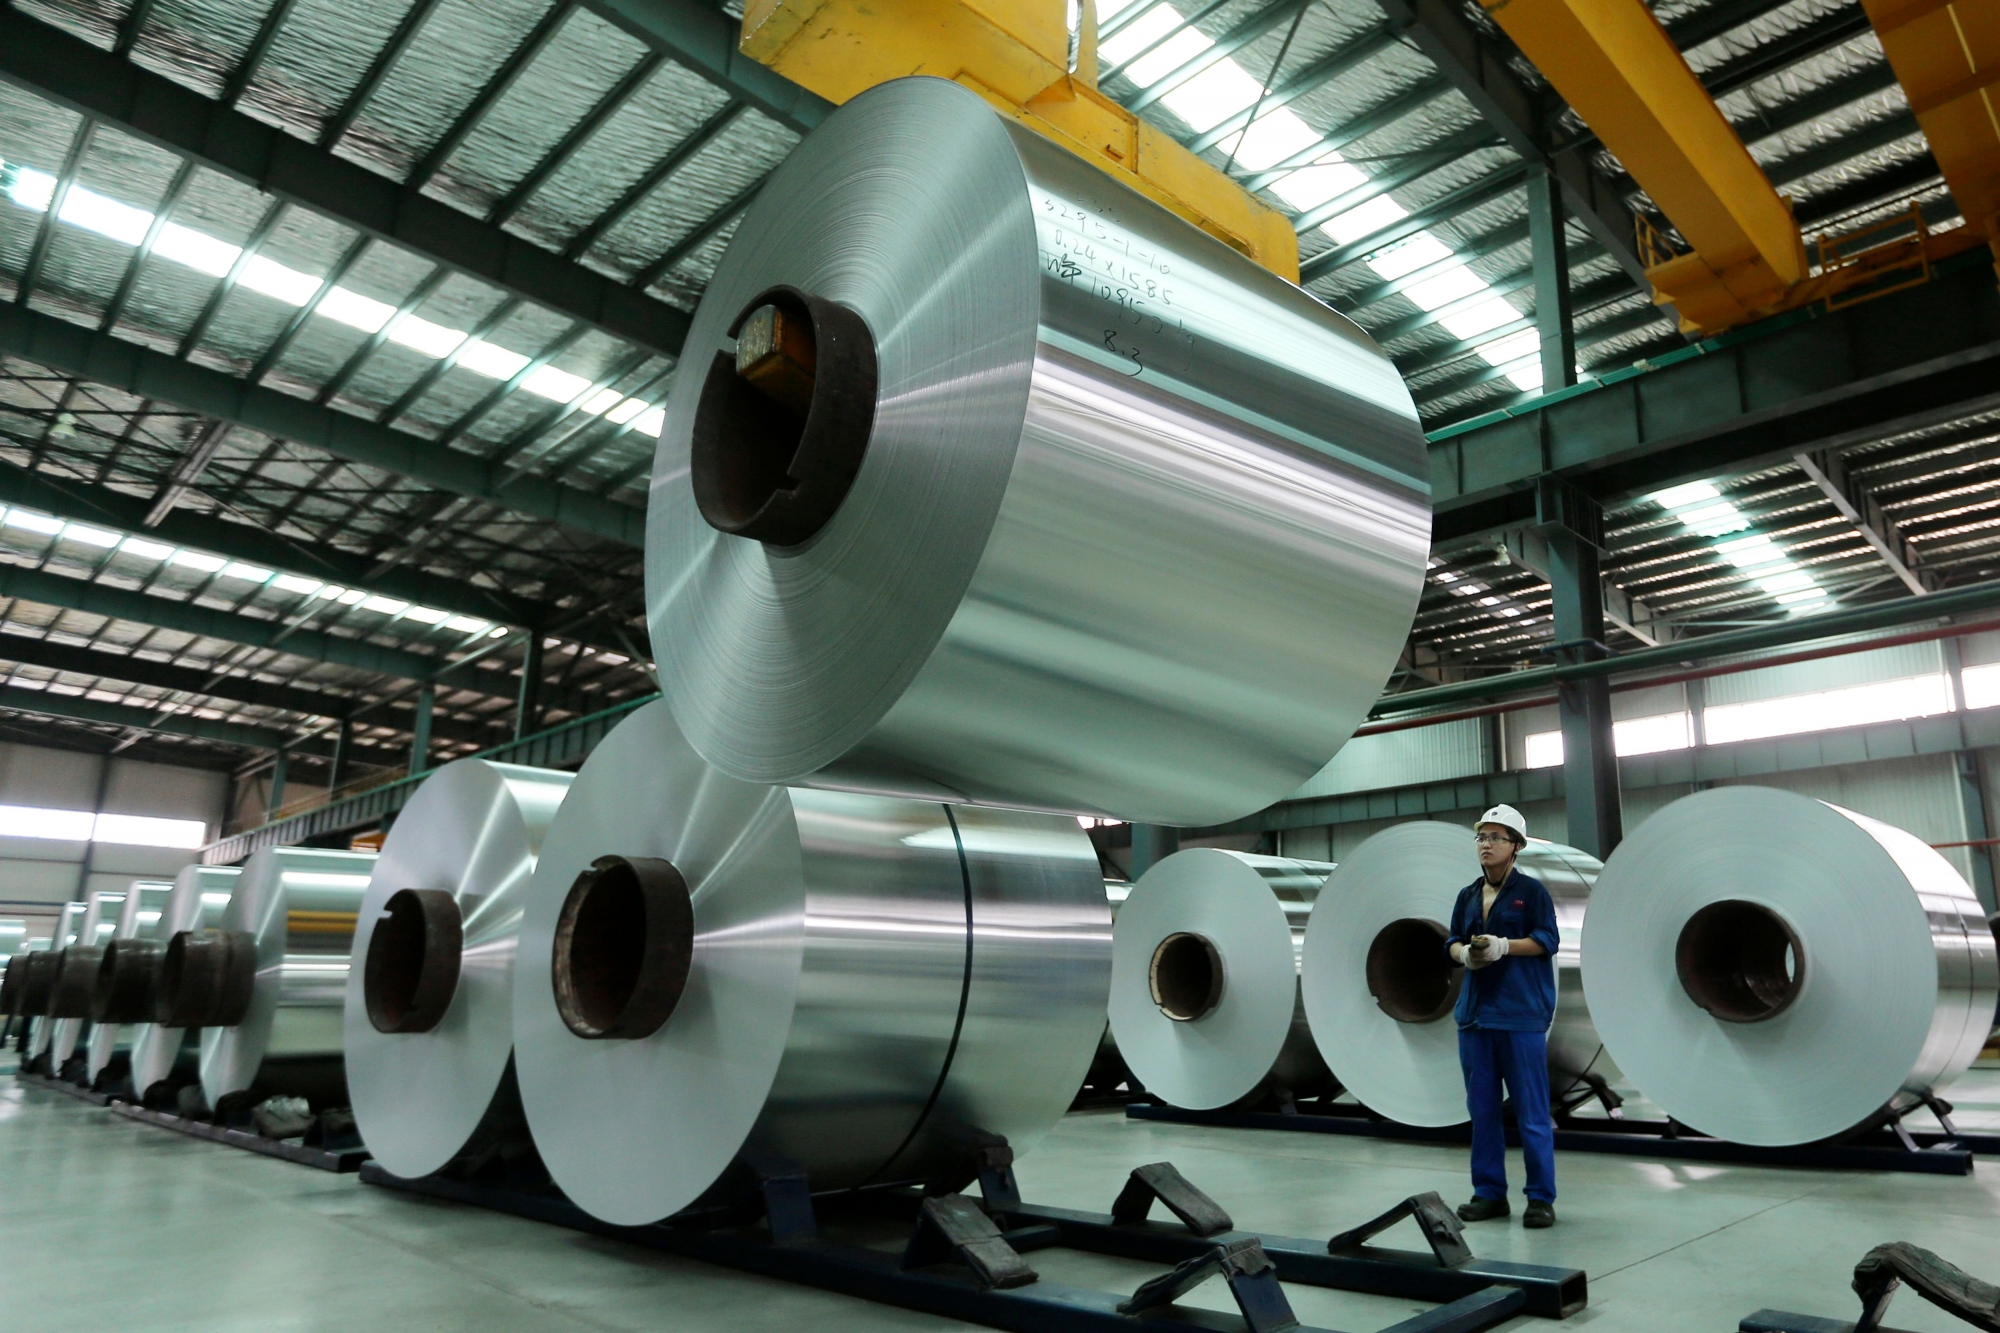 In this Aug. 3, 2017 photo, a worker arranges the aluminum rolls at a factory in Suixi county in central China's Anhui province. China's trade growth weakened in July in a negative sign for the country's economic growth and global demand. Customs data on Tuesday, Aug. 8, 2017 showed growth in exports decelerated to 7.2 percent from June's 11.3 percent. Imports rose 11 percent, down from the previous month's 17.2 percent. (Chinatopix via AP) CHINA OUT China Trade